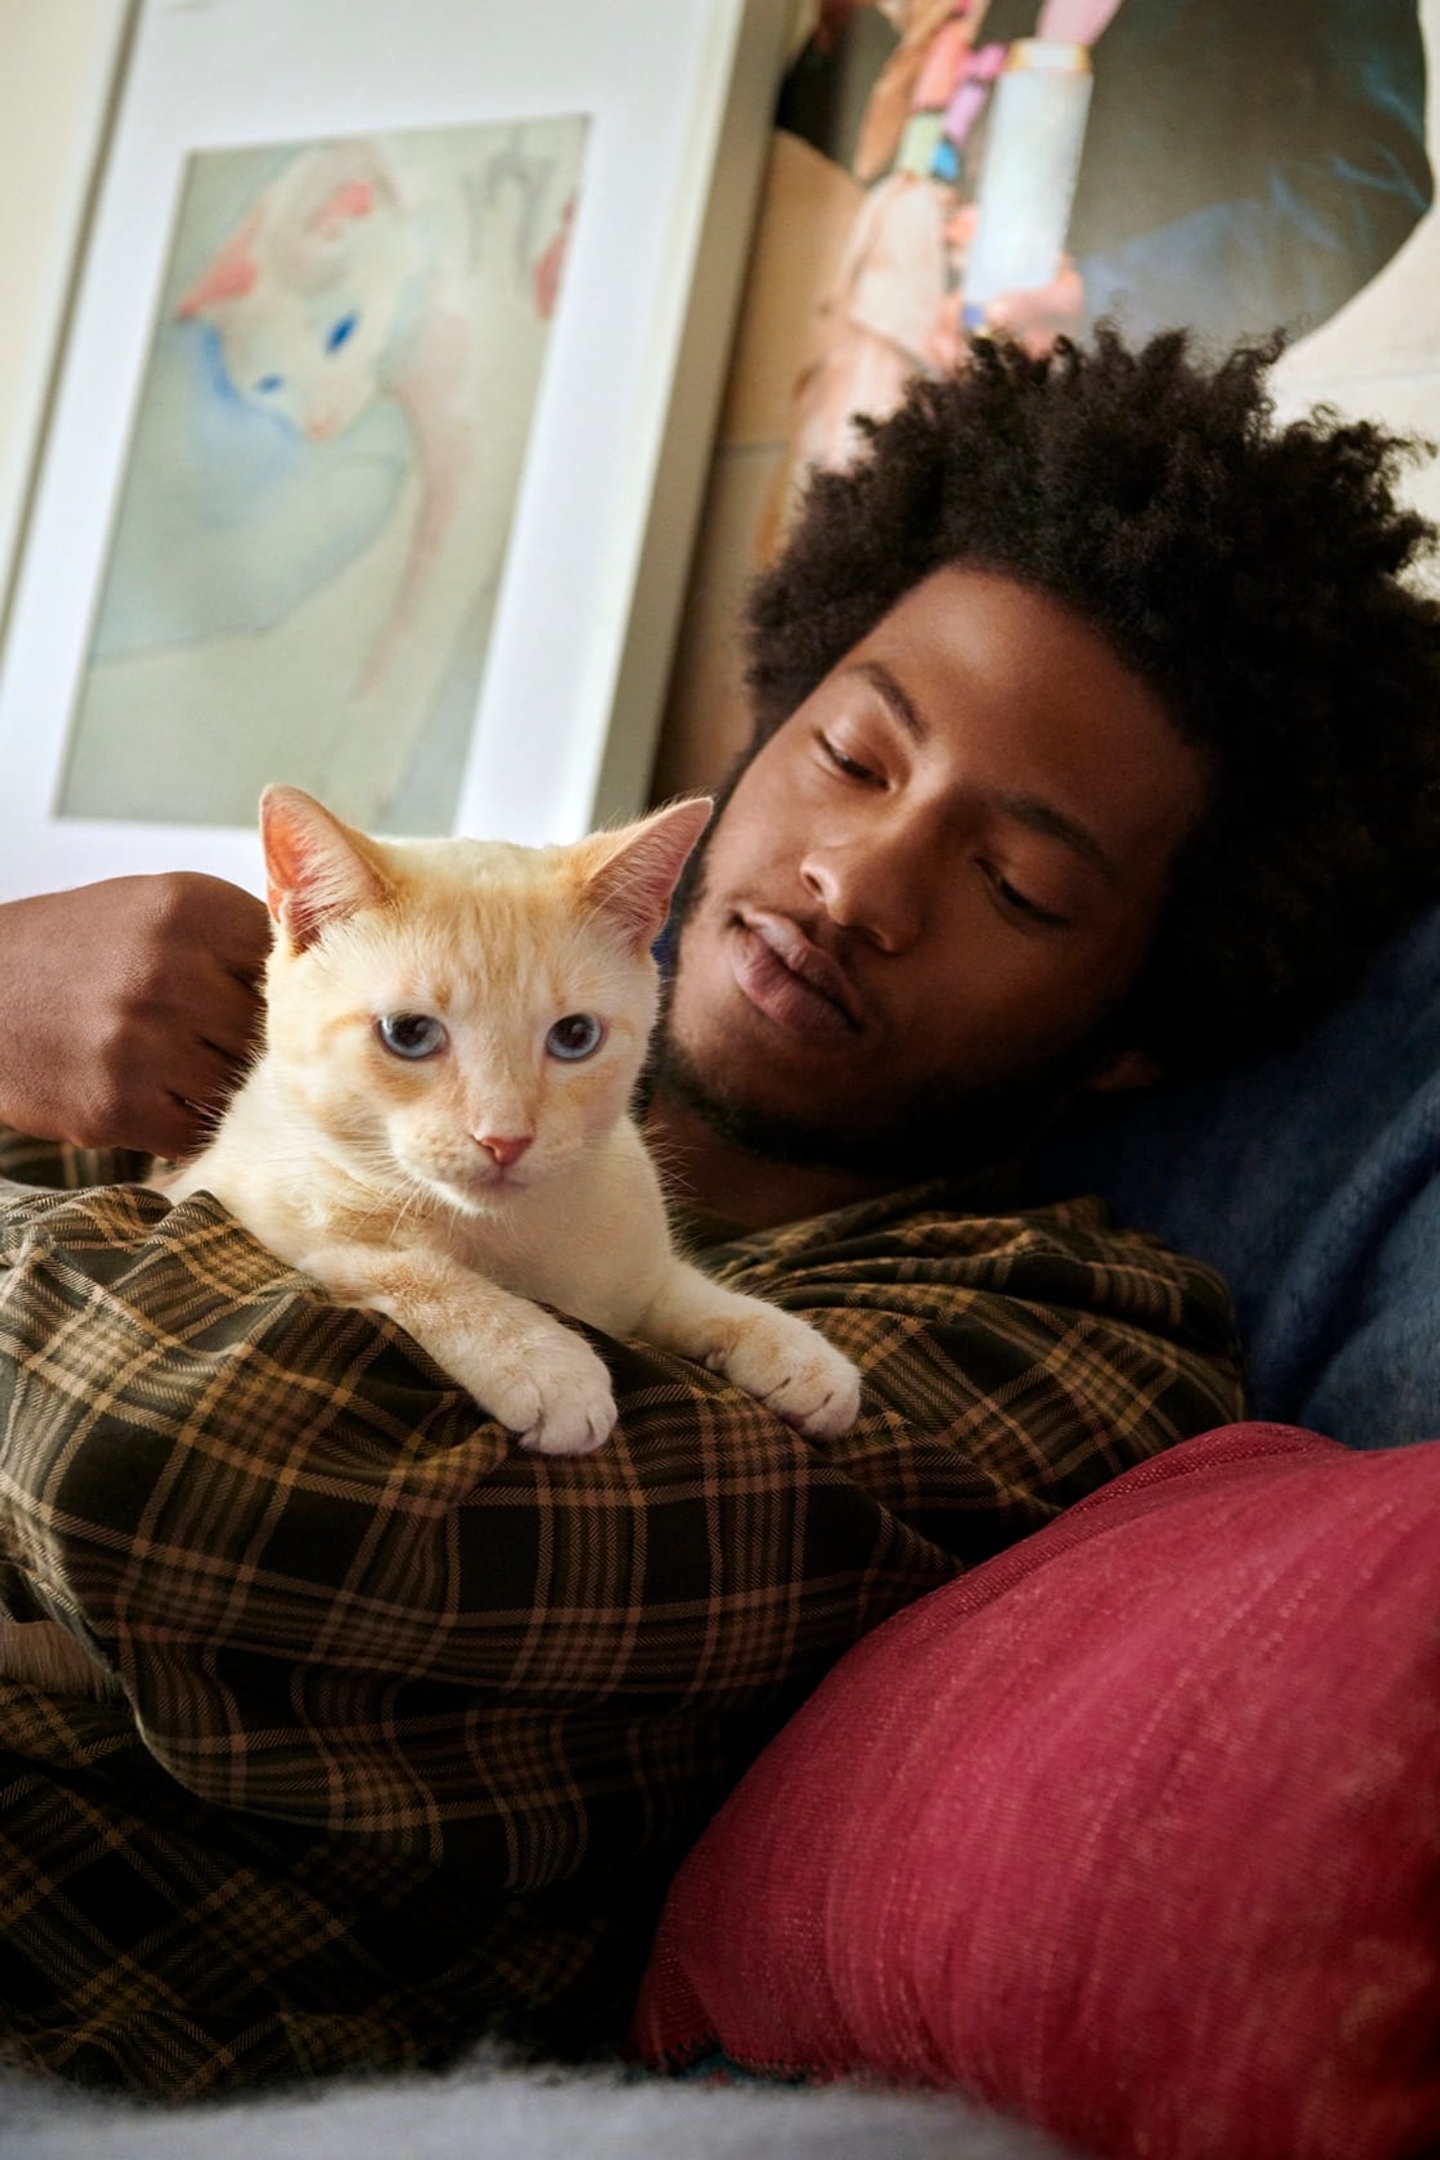 A man gently gazes at a cat that he is holding in his arms while relaxing on a couch 